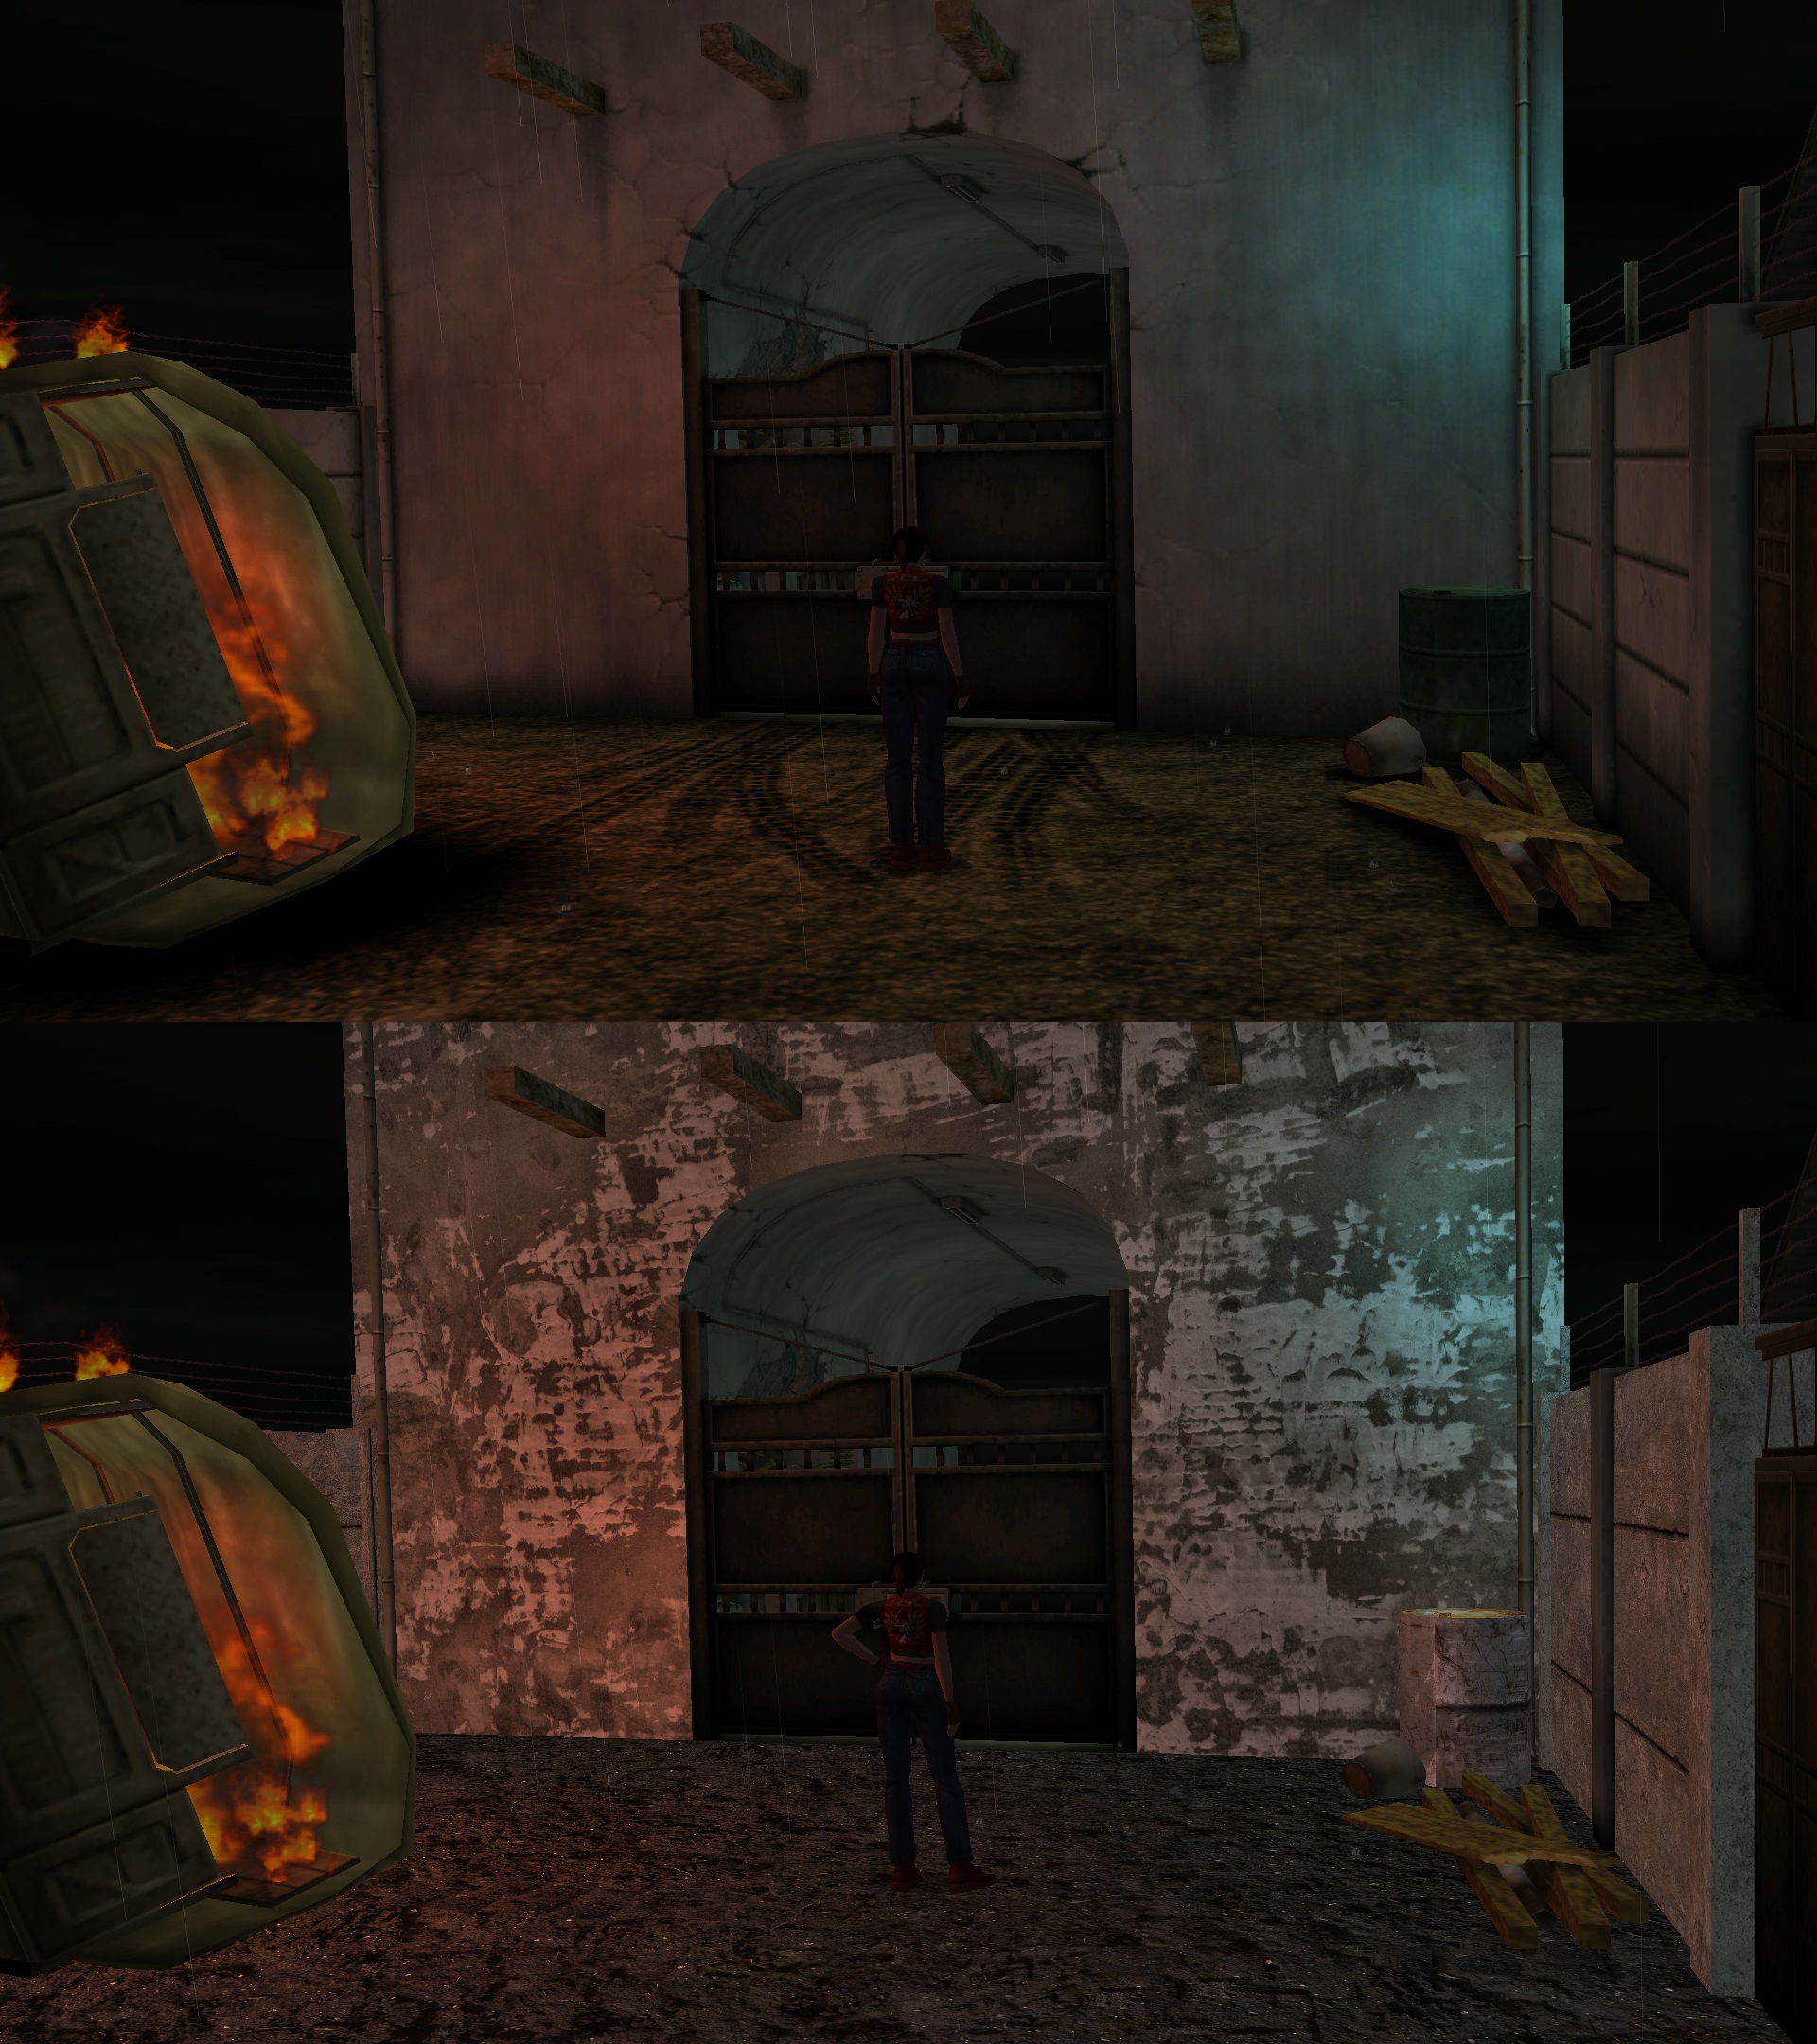 Resident Evil Code: Veronica X HD Texture Pack 1.1 by JuanchoTexHD